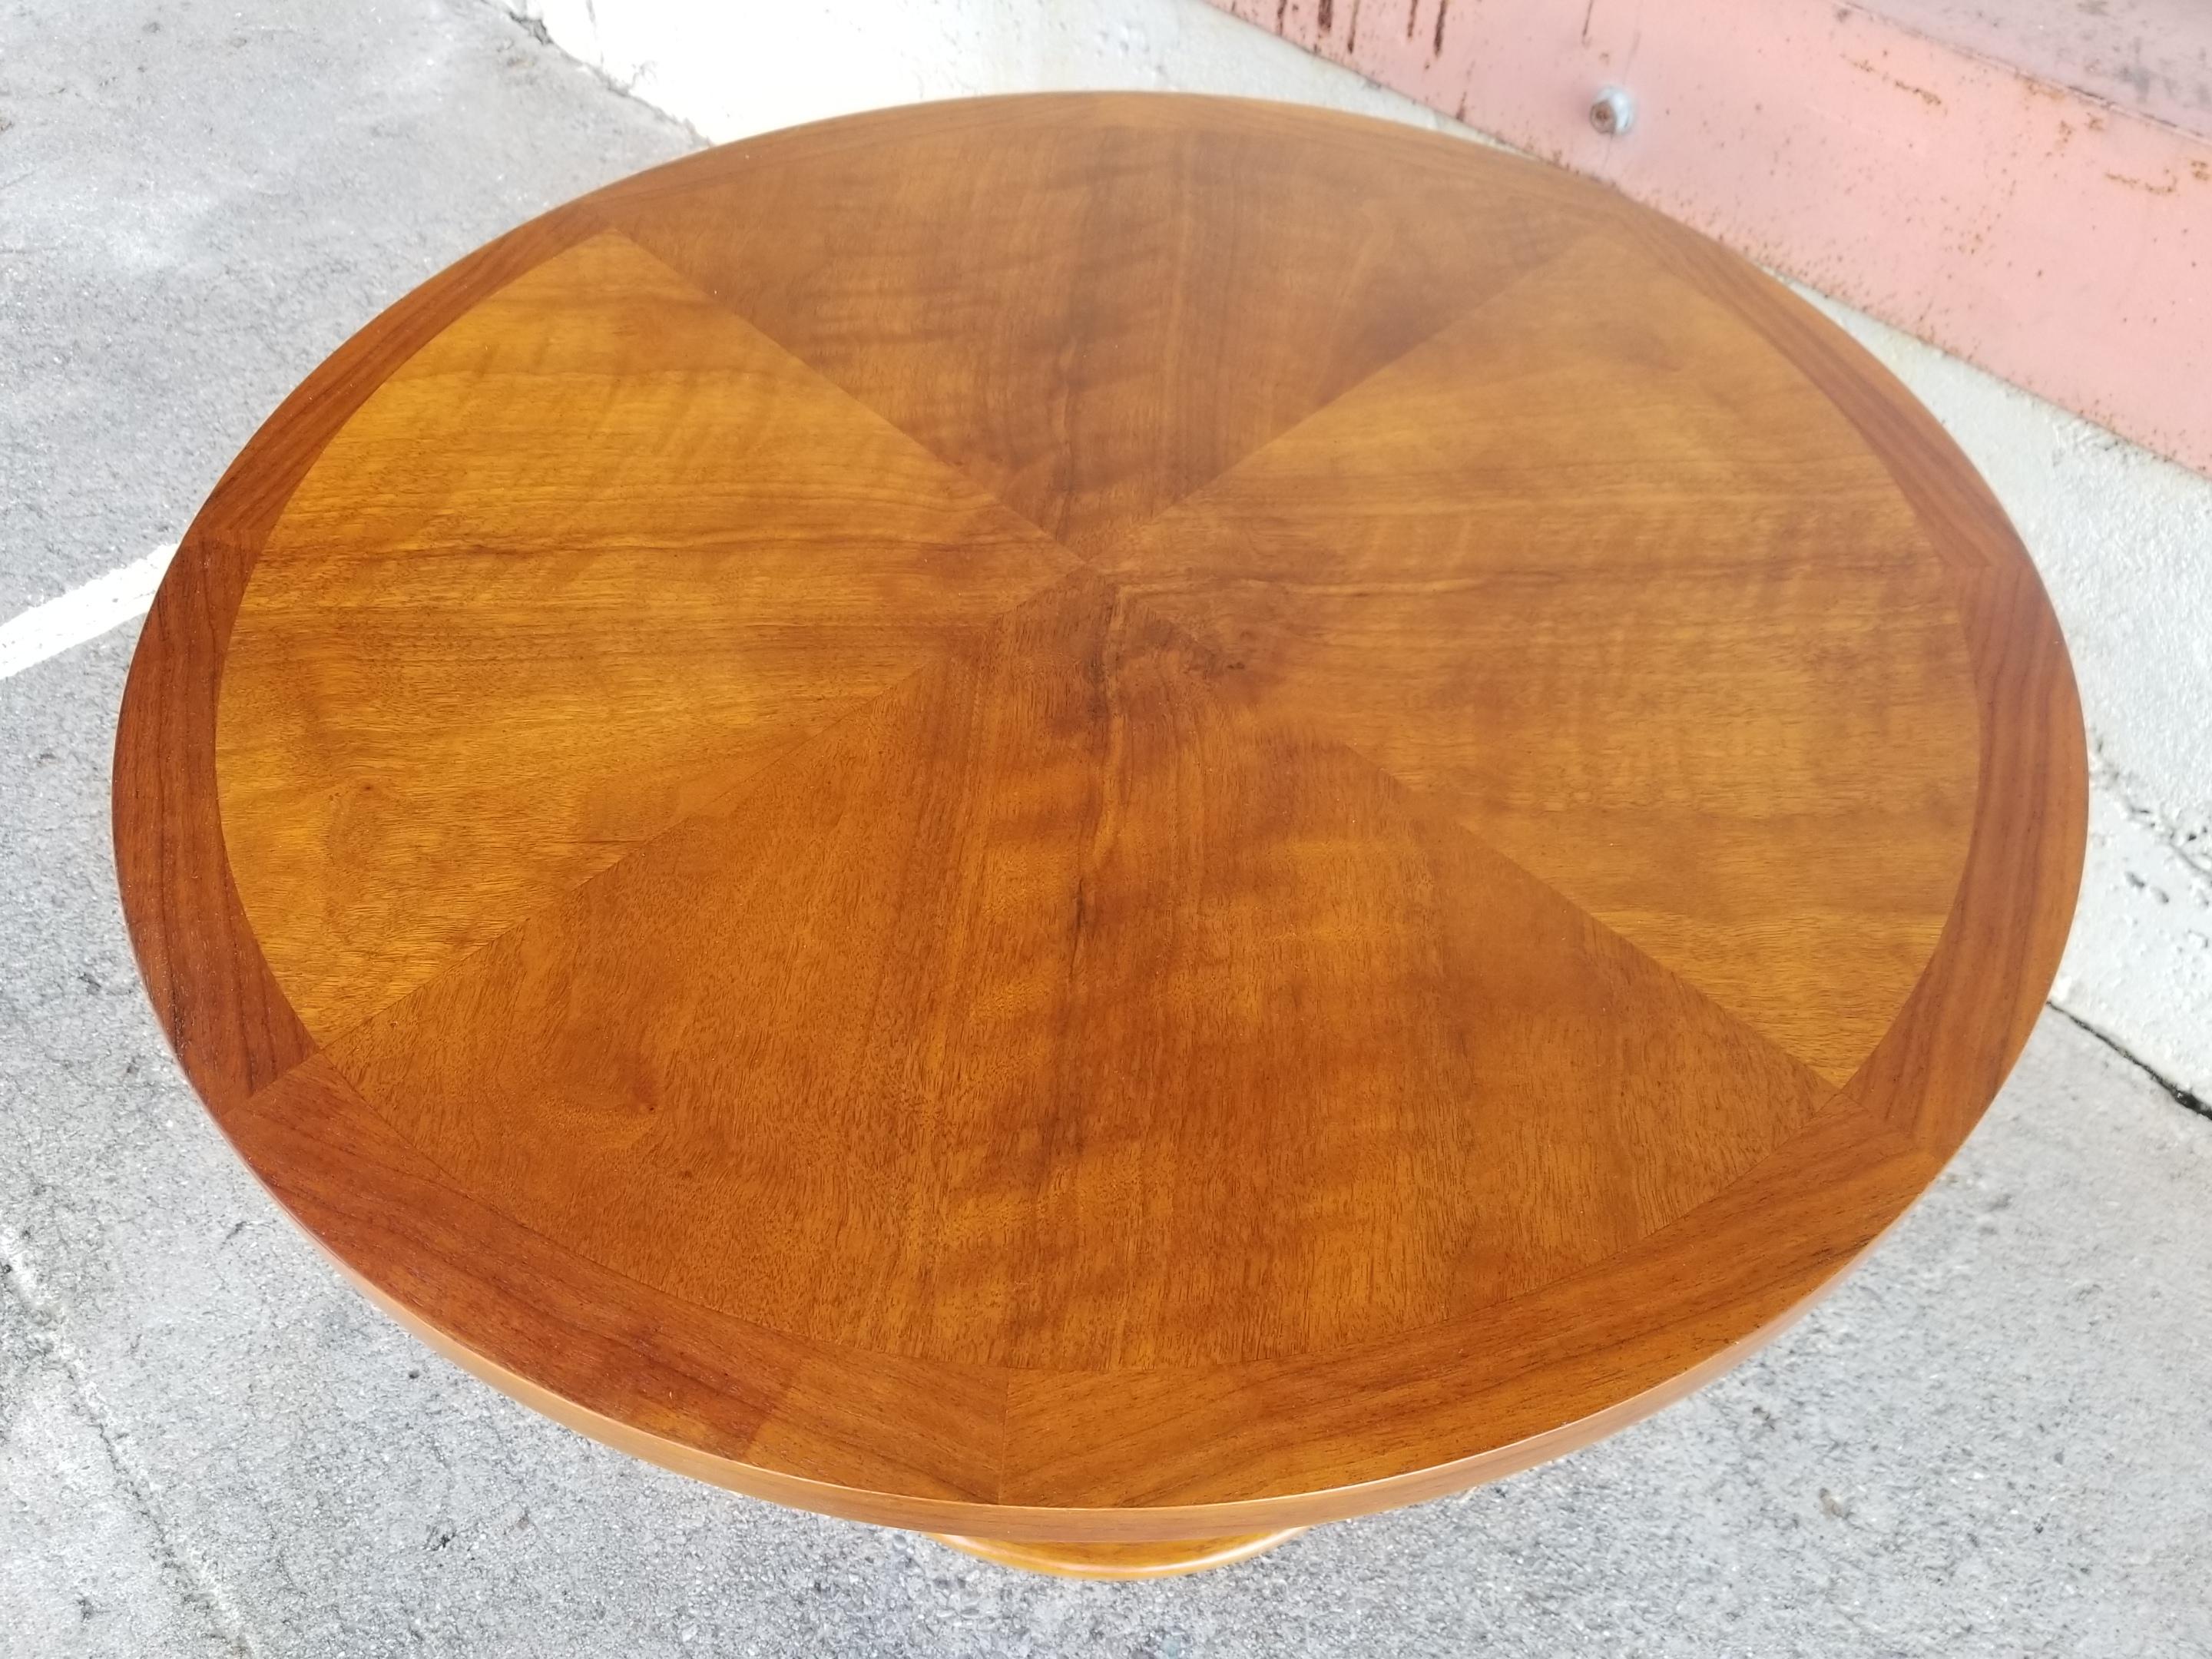 A Mid-Century Modern circular end table designed in the manner of Adrian Pearsall, circa 1960s. Book-matched veneer top with solid hardwood sculptural base. Branded underside with Lane style number 997 and serial number 560611, dating this piece to